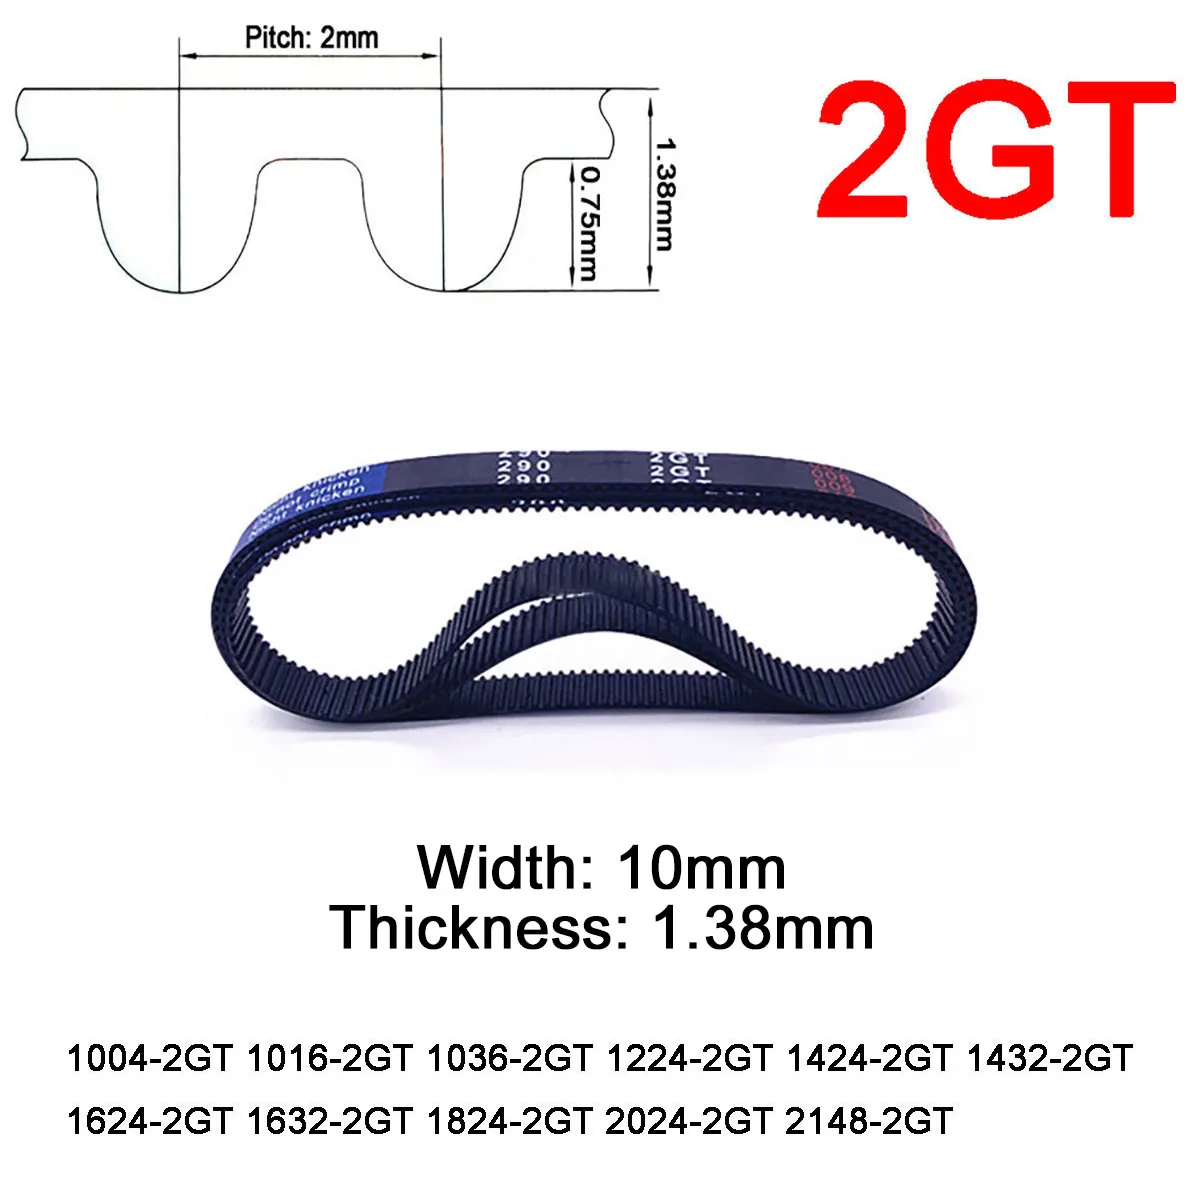 

1Pc Width 10mm 2GT Rubber Arc Tooth Timing Belt Pitch Length 1004 1016 1036 1224 1424 1432 1624 1632 1824 2024 2148mm Drive Belt